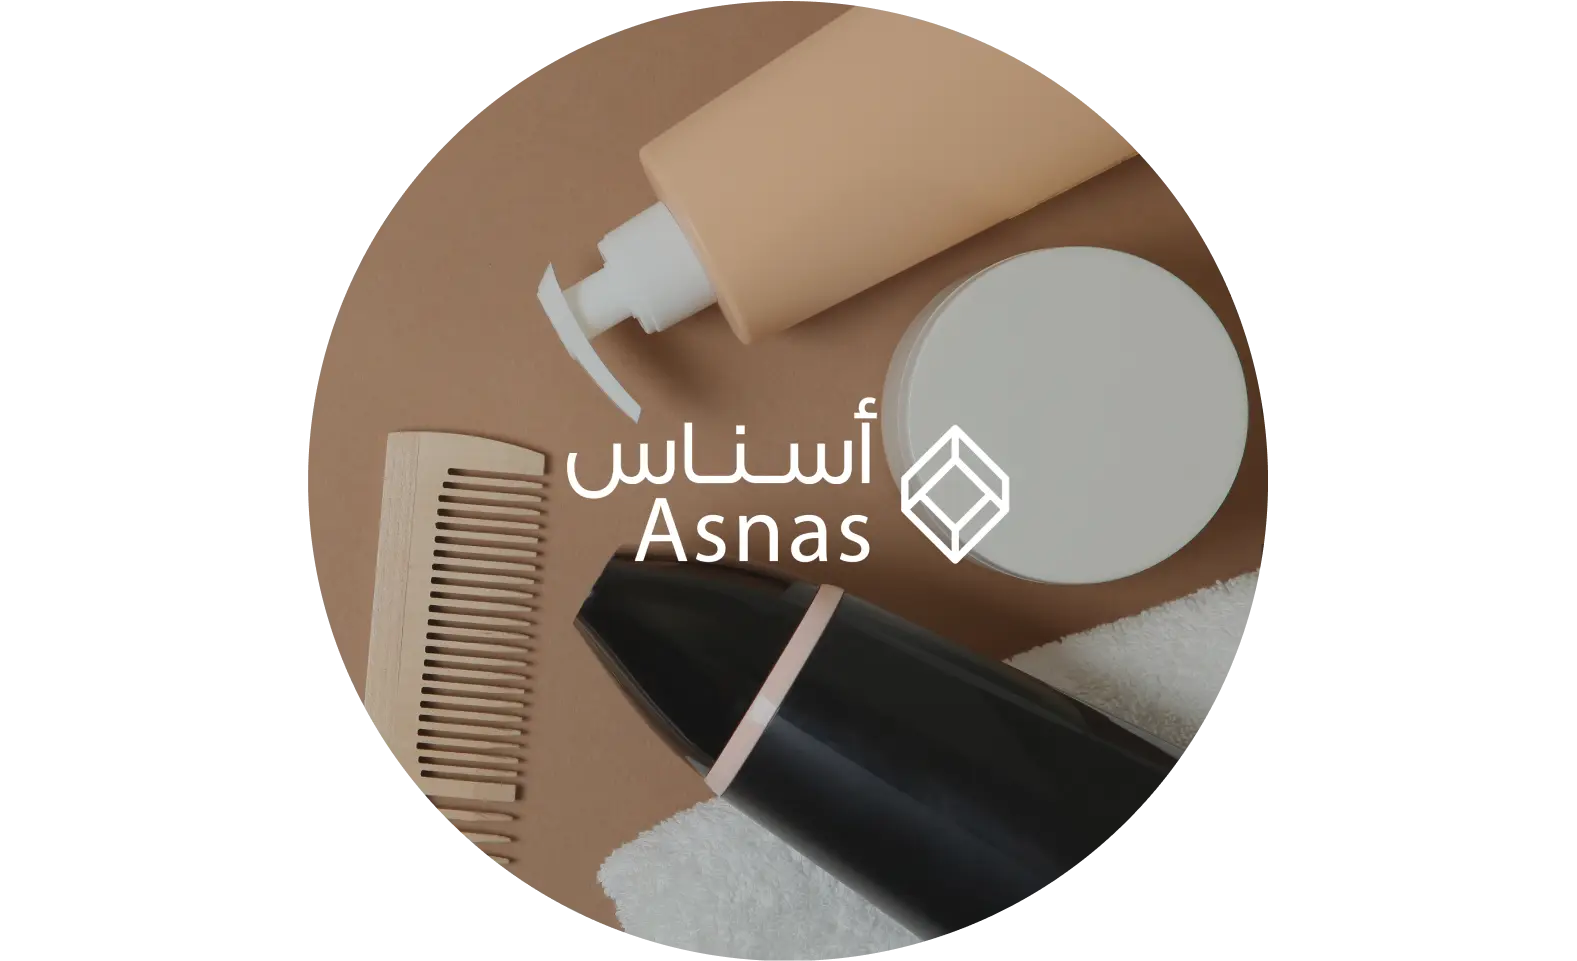 Asnas grows its sales 35% overnight.